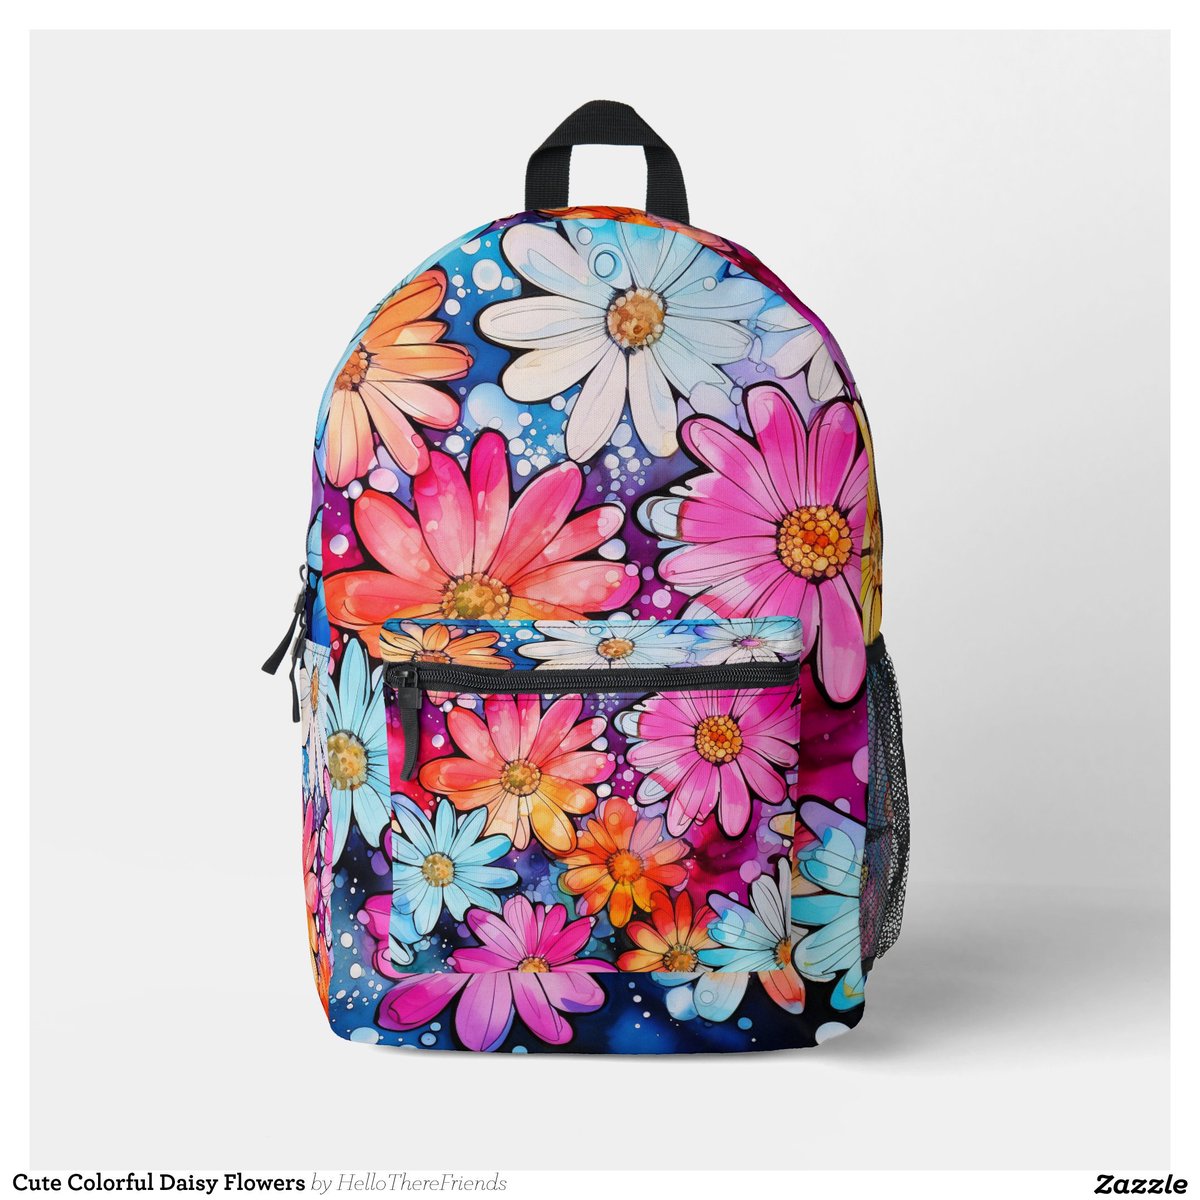 This super cute daisy flower backpack is now available→zazzle.com/z/potan2i5?rf=…

#Bookbags #Backpacks #TravelBags #Daisies #DaisyFlowers #Flowers #Teenagers #Daughter #BackToSchool #Zazzle